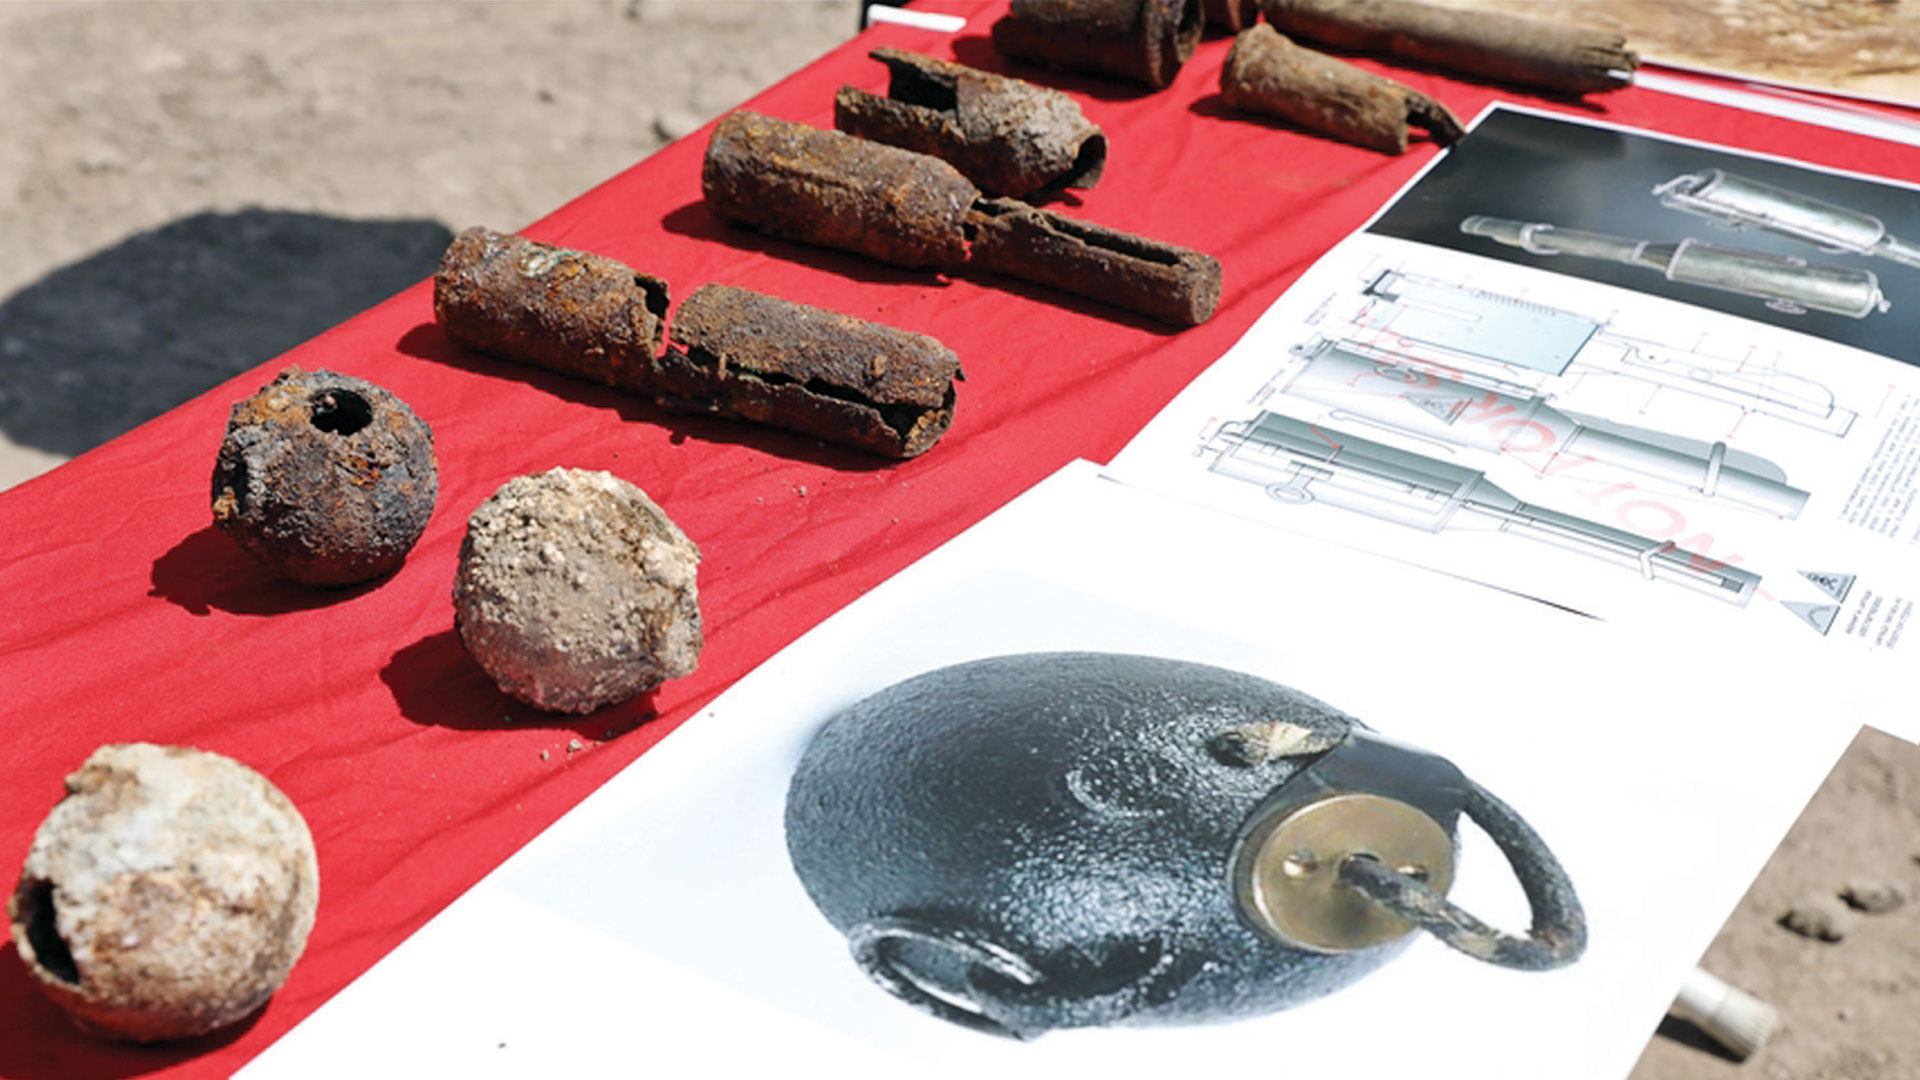 782 Ottoman bombs discovered in Turkey